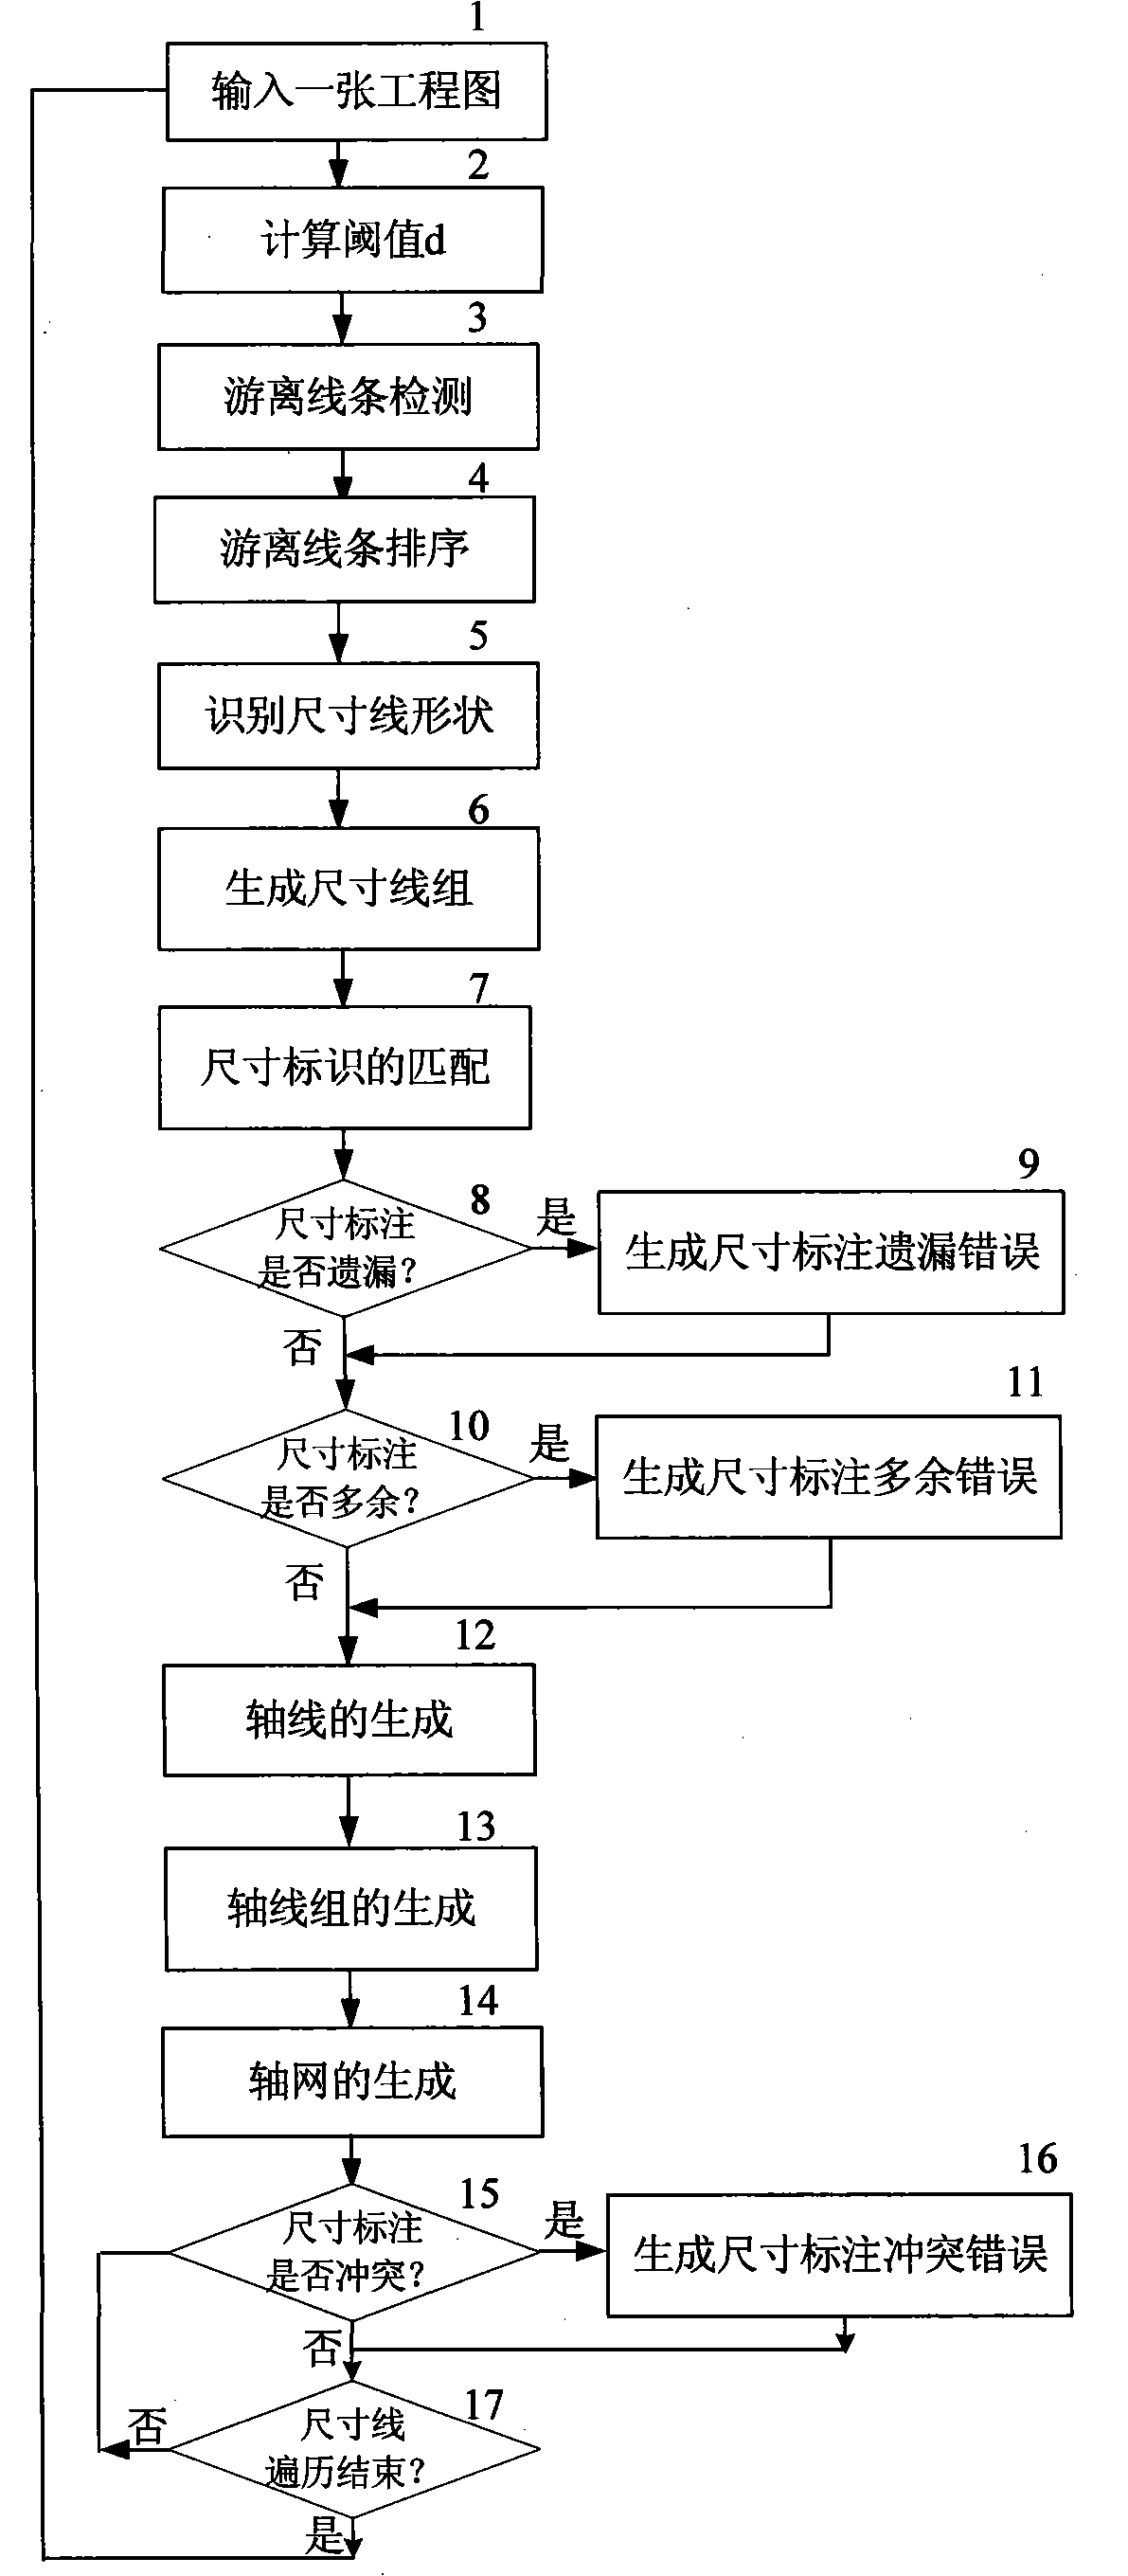 Automatic checking method for dimension line marking error in engineering drawing